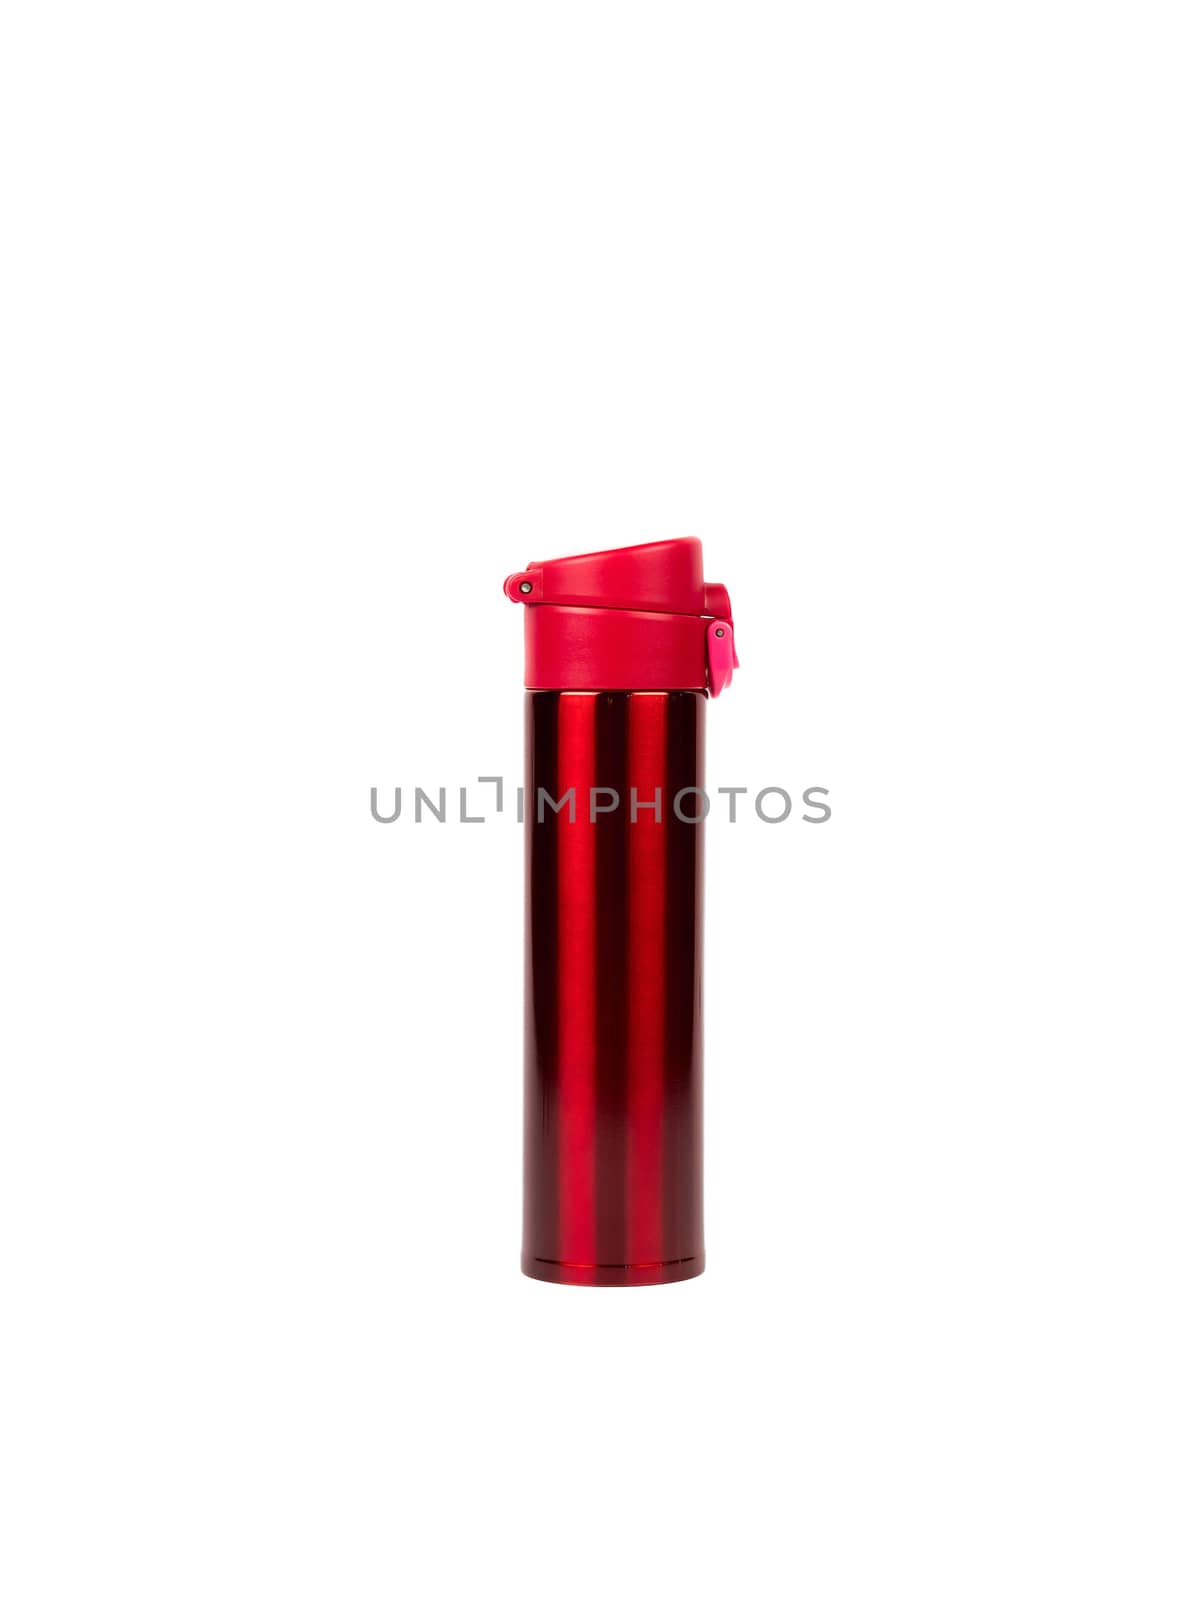 Red thermos bottle isolated on white background with copy space by Fahroni